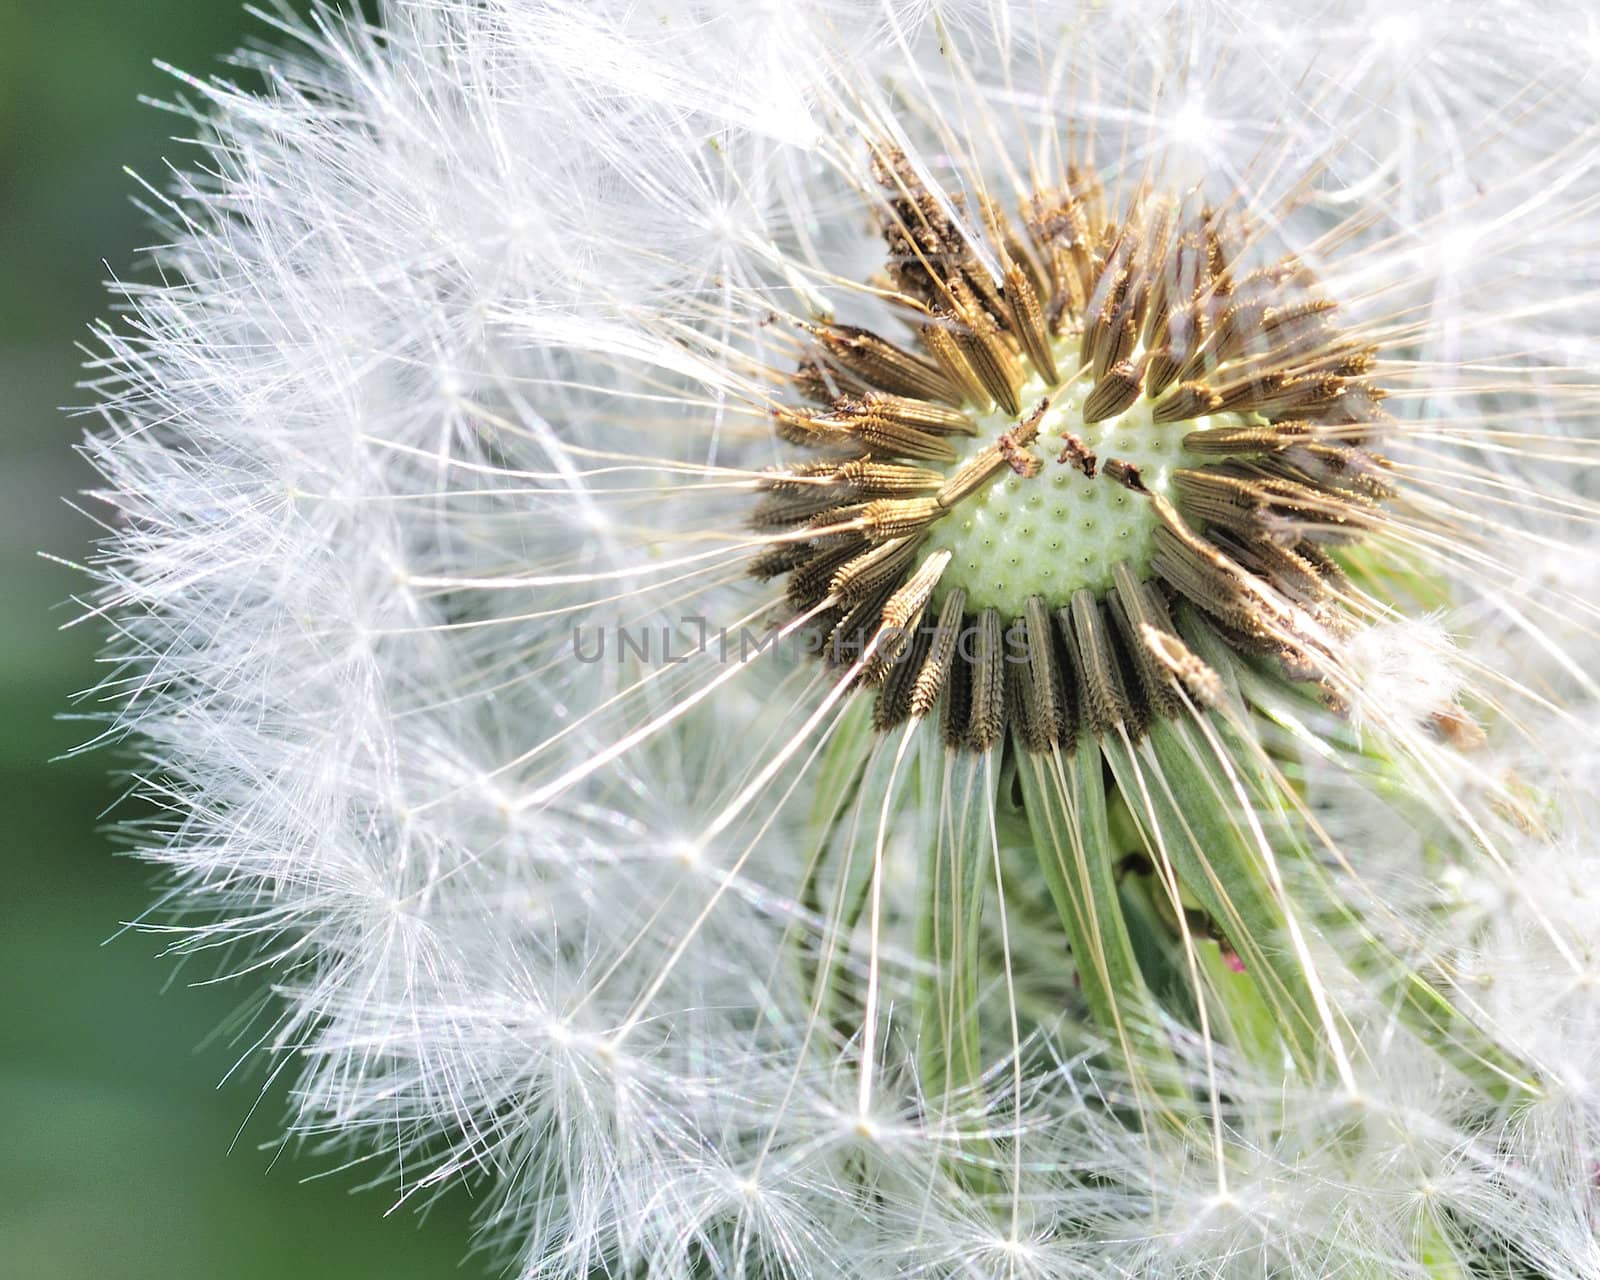 A group of dandelion seeds about to fly off in the wind.